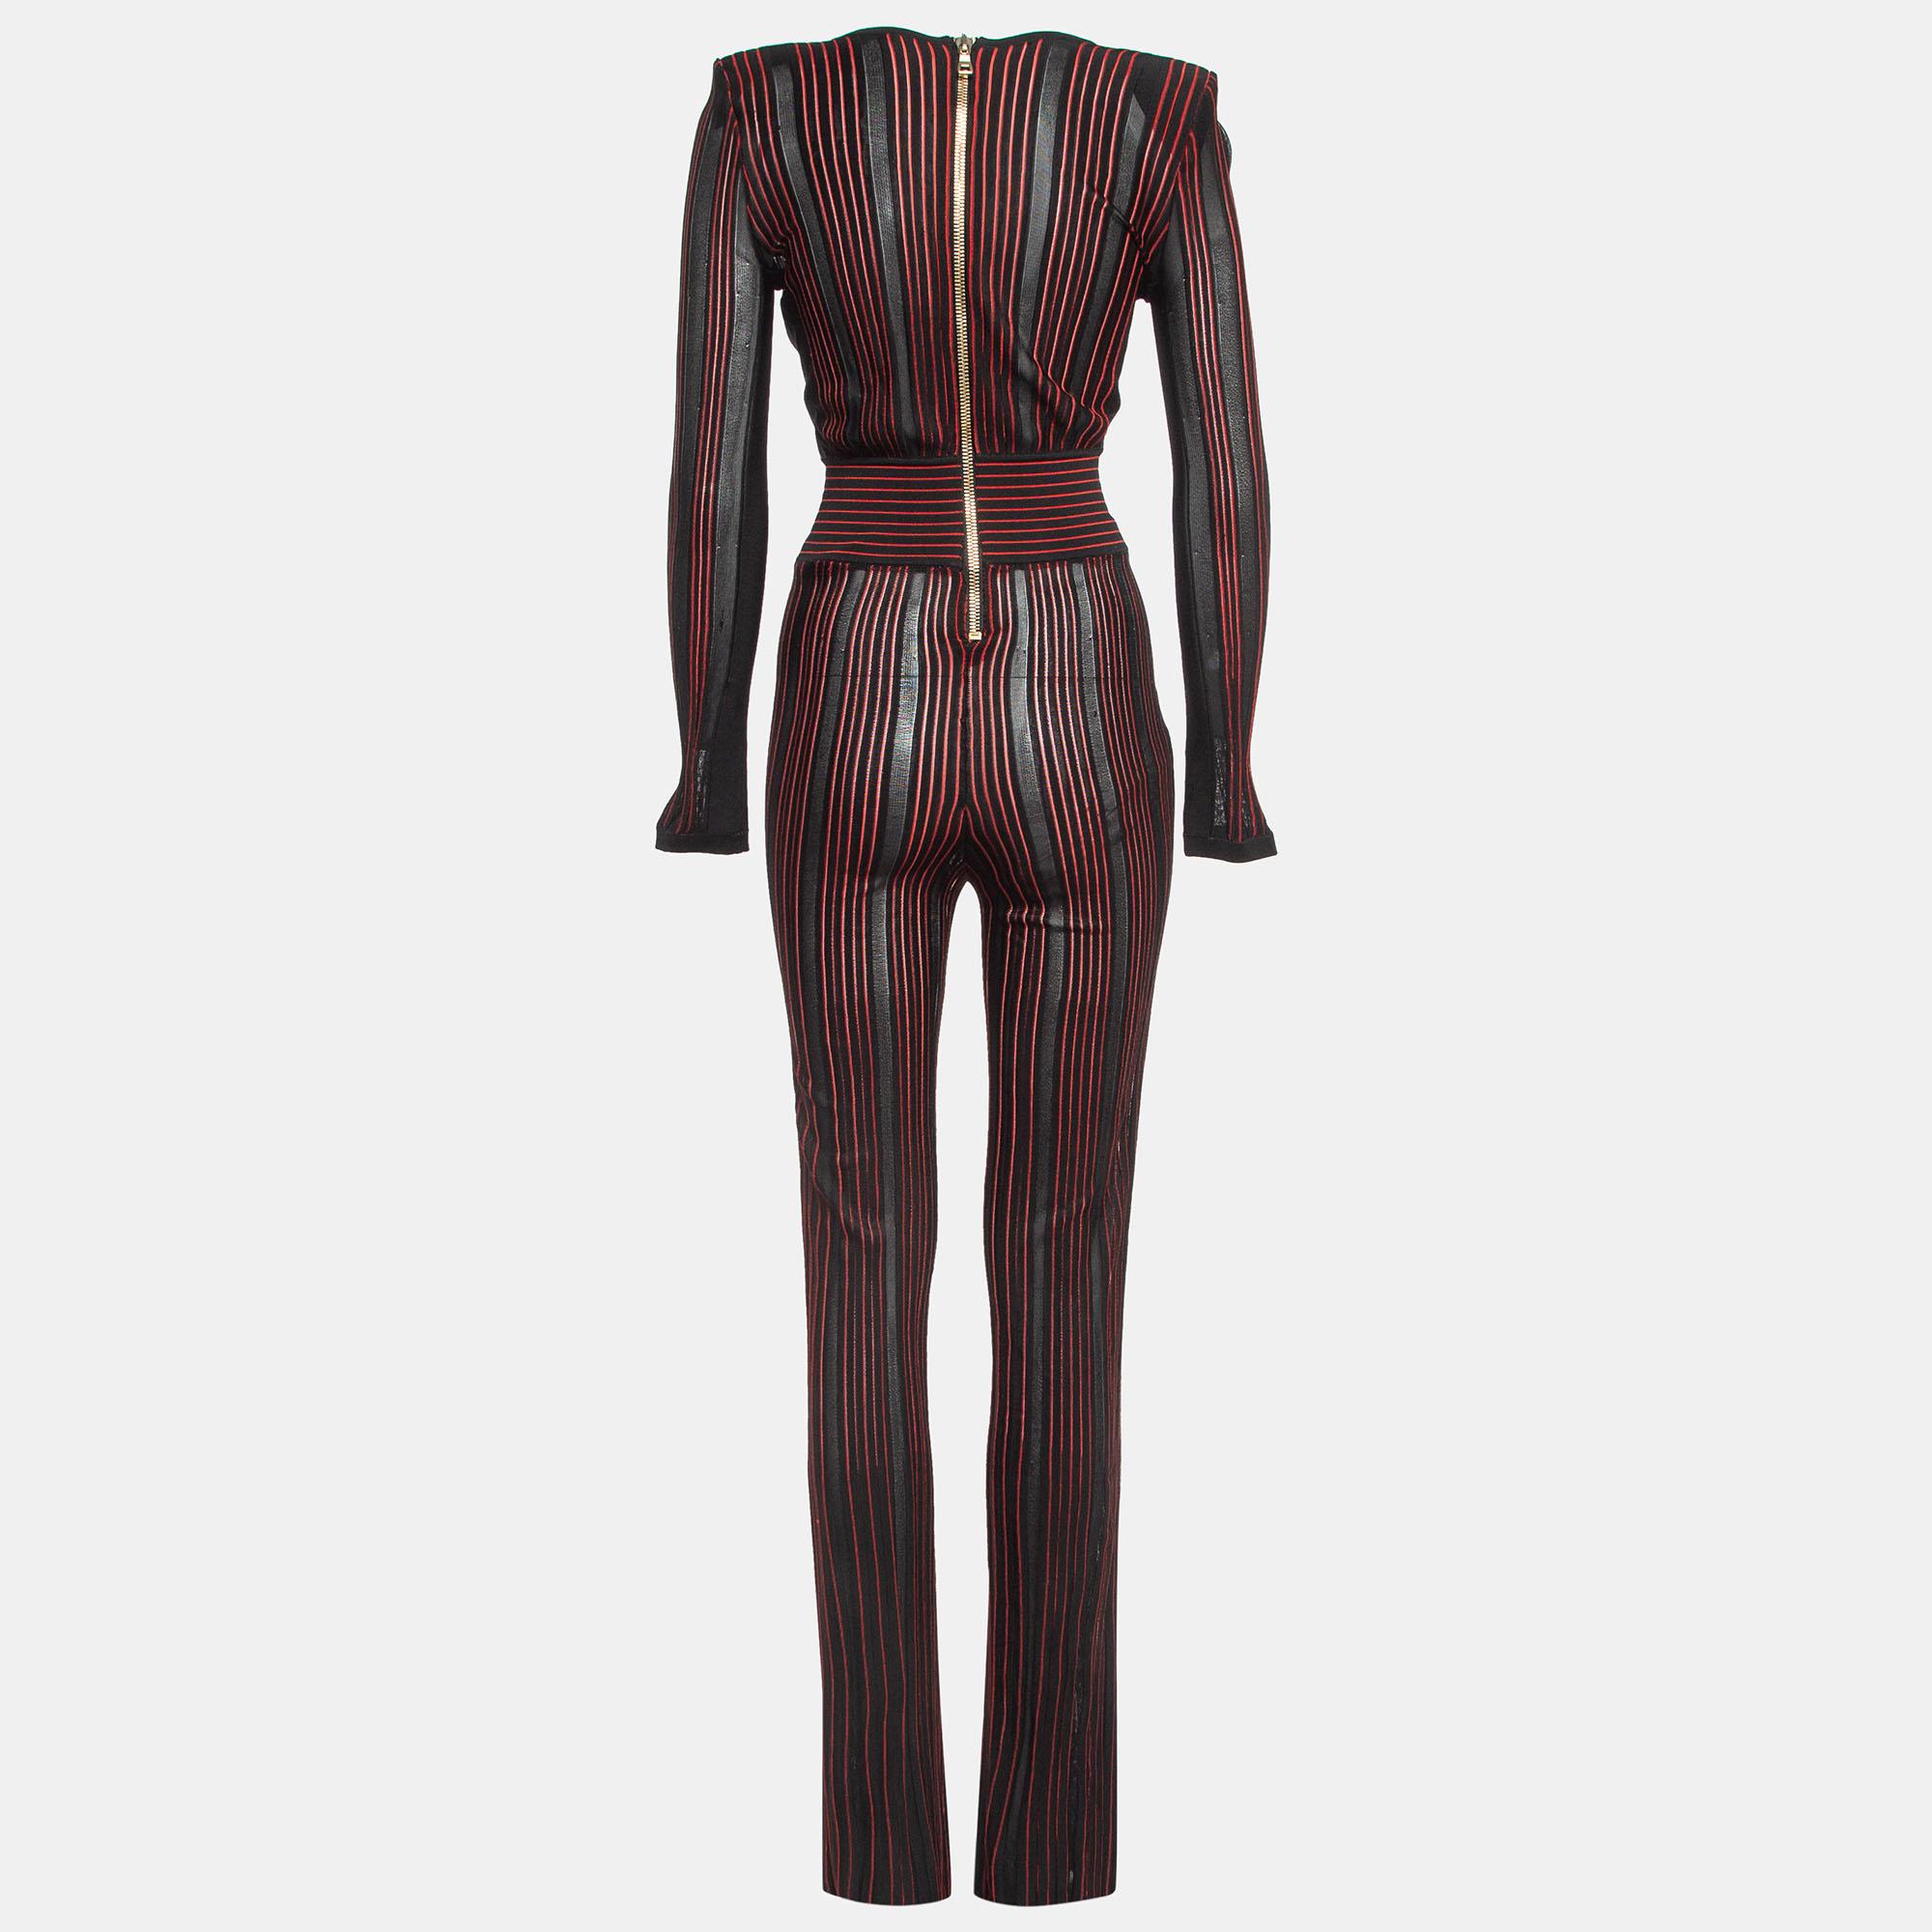 It's time you got a gorgeous jumpsuit, and what better than this designer one? It is made of the finest materials. Team it with pumps.

